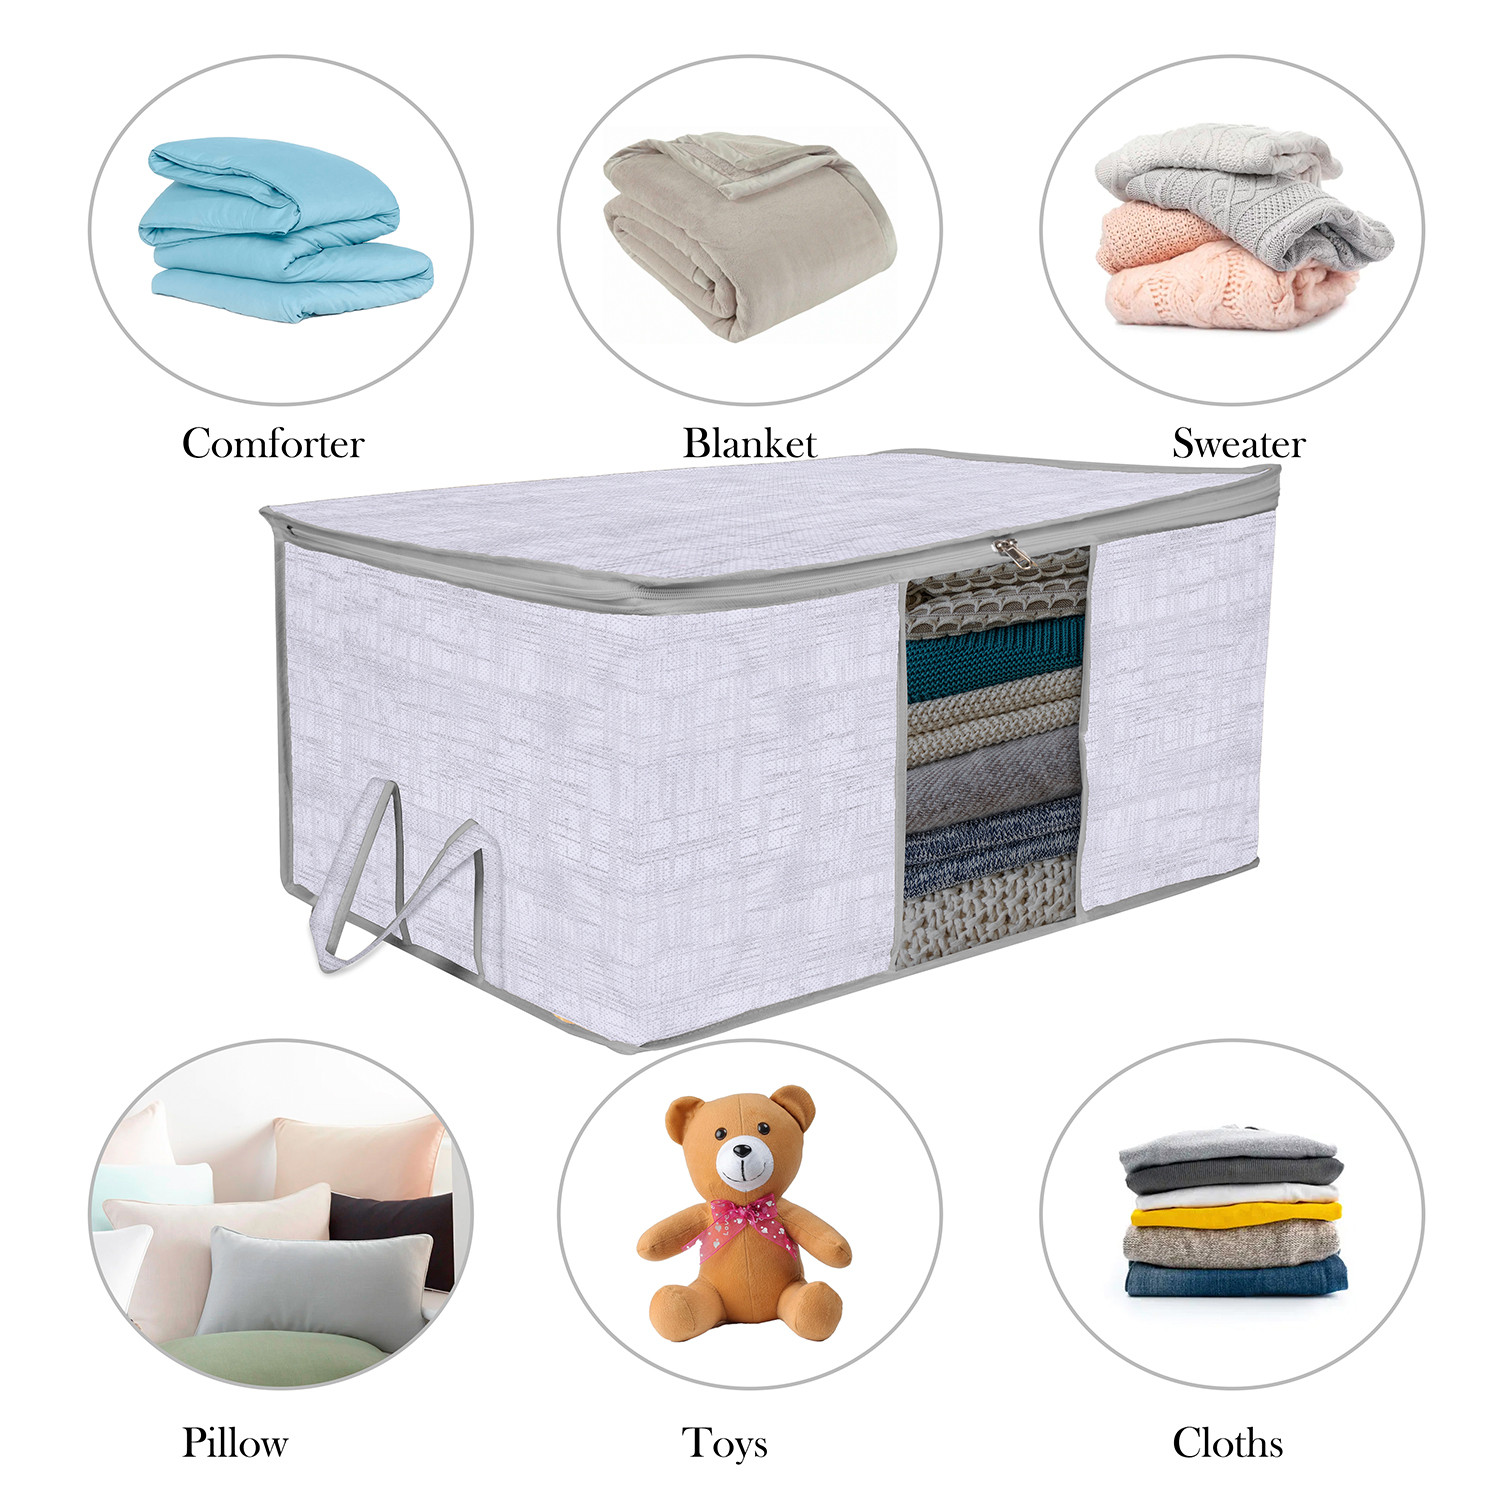 Kuber Industries Underbed Storage Bag | Clothes Storage Organizer | Clear Window Blanket Cover | Cloth Organizer with Handle | Jute Printed-Design | Large |Gray